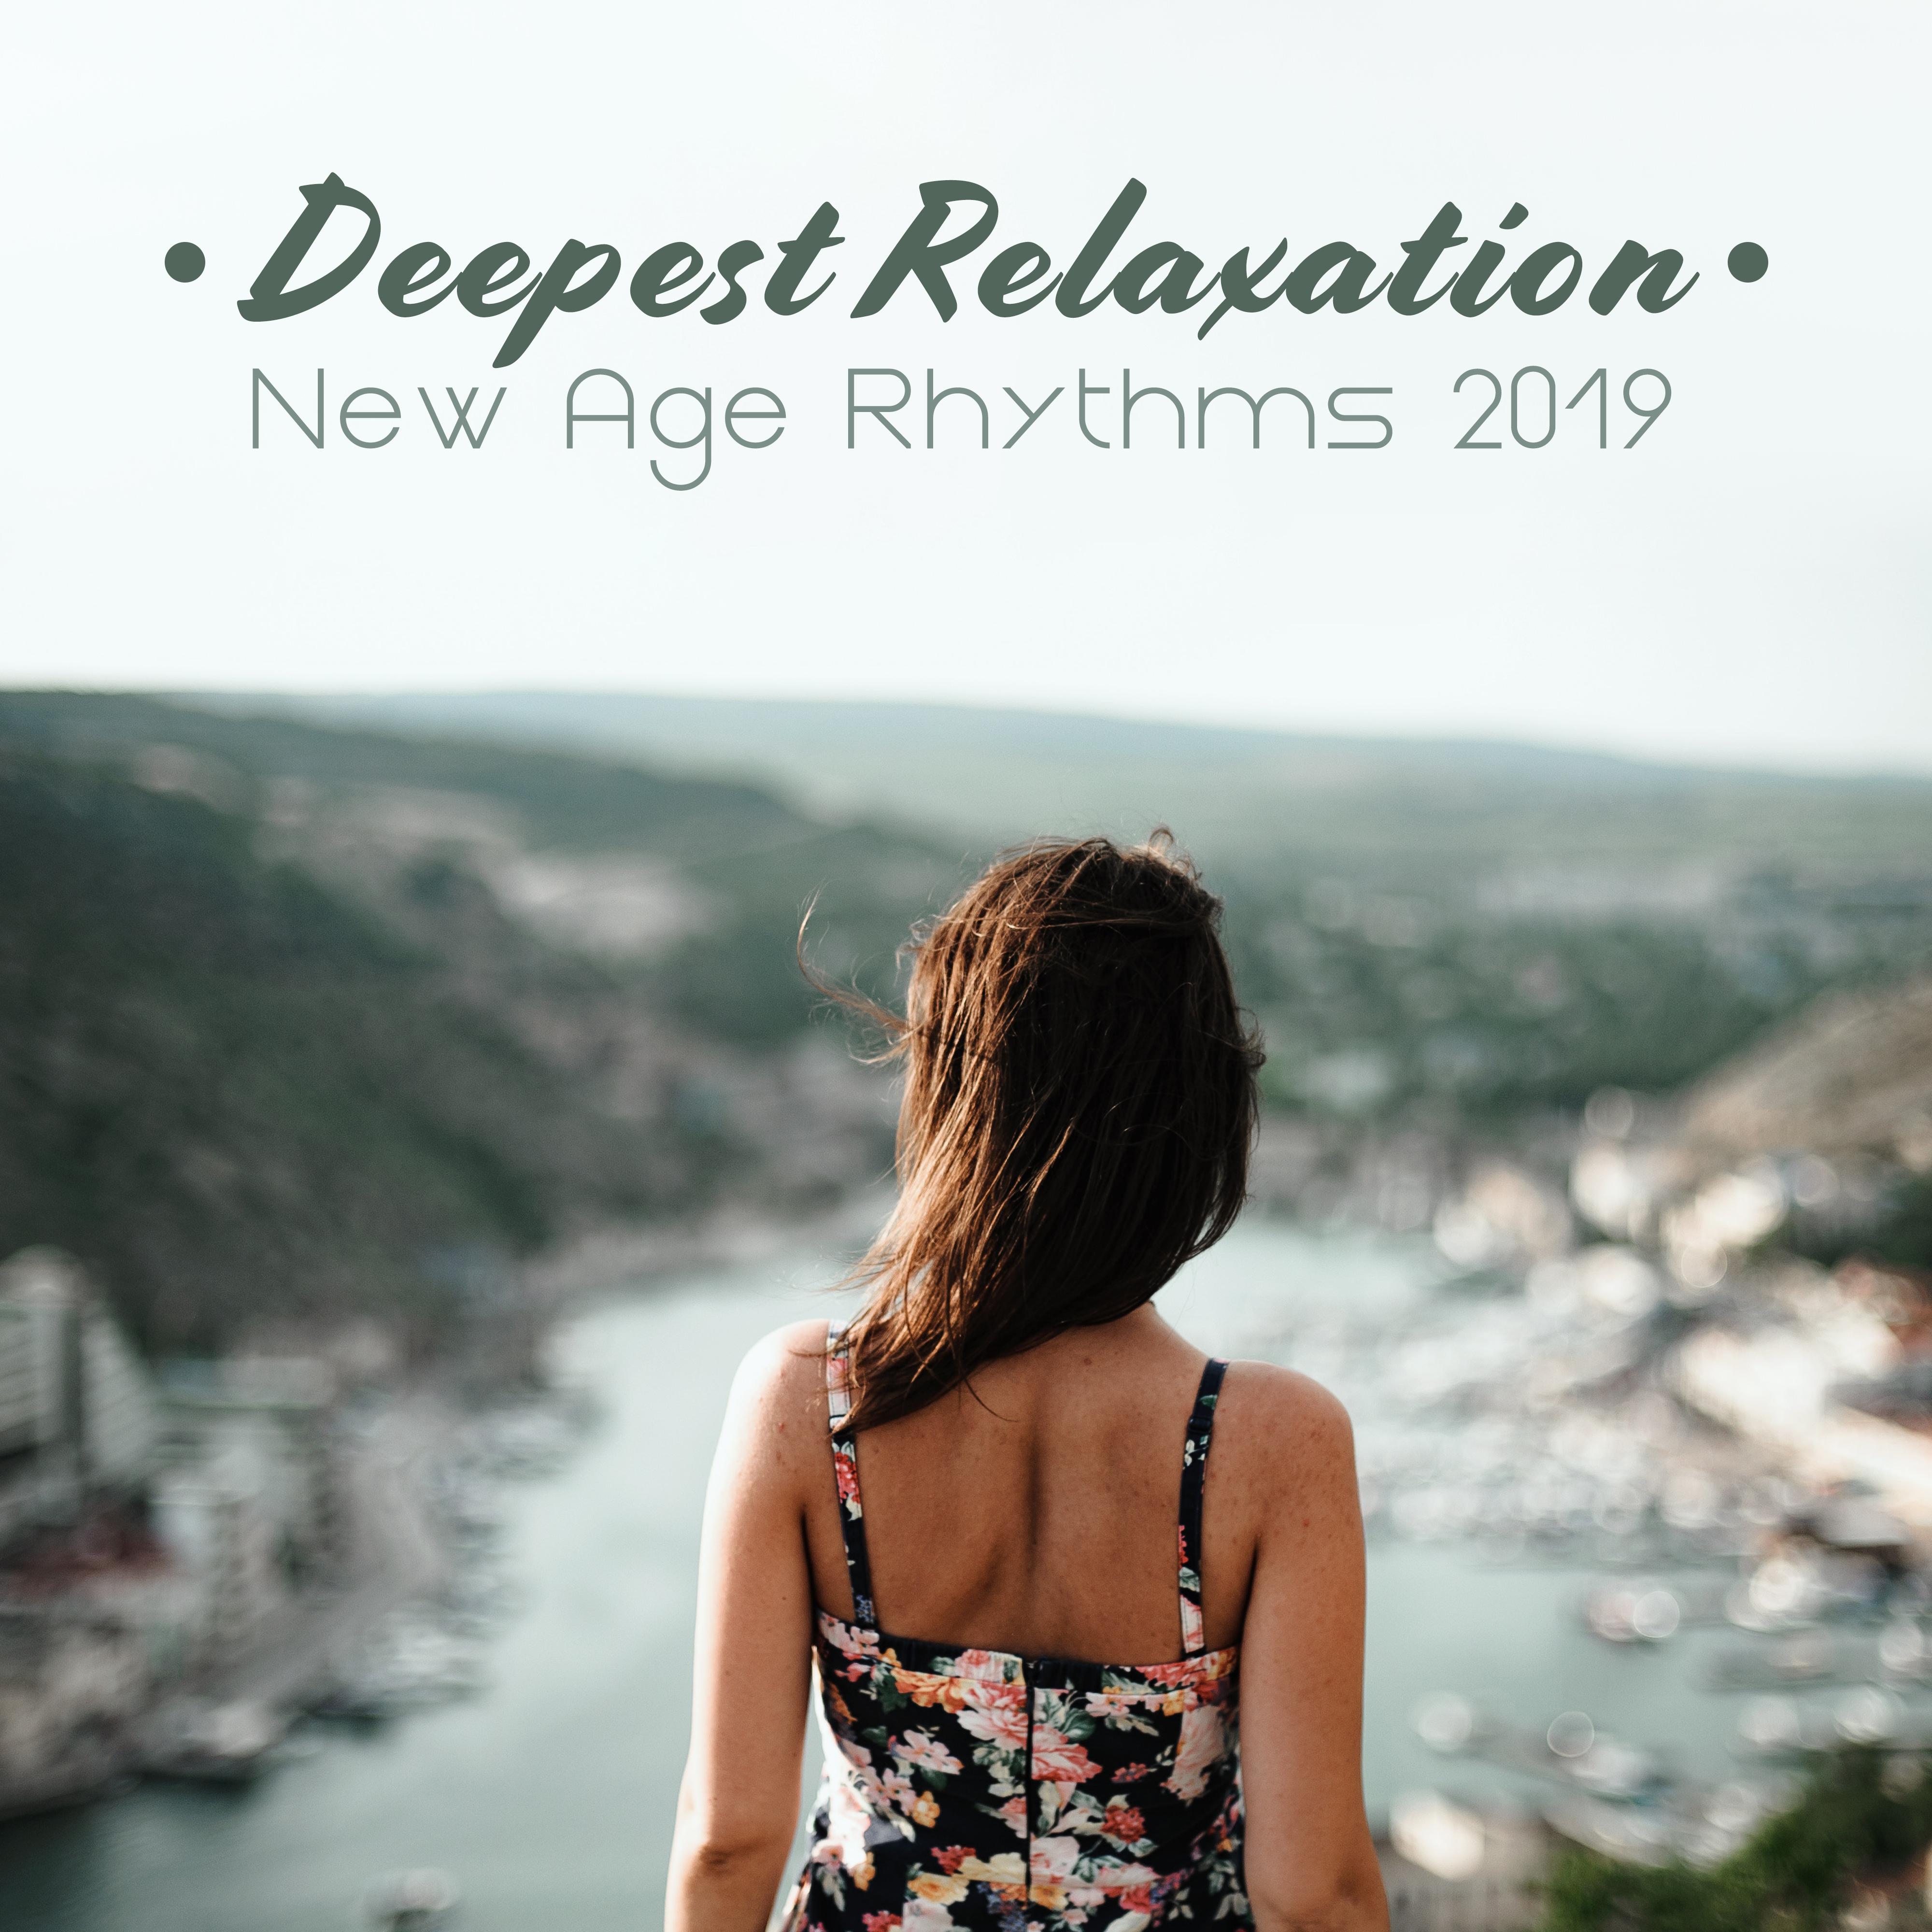 Deepest Relaxation New Age Rhythms 2019